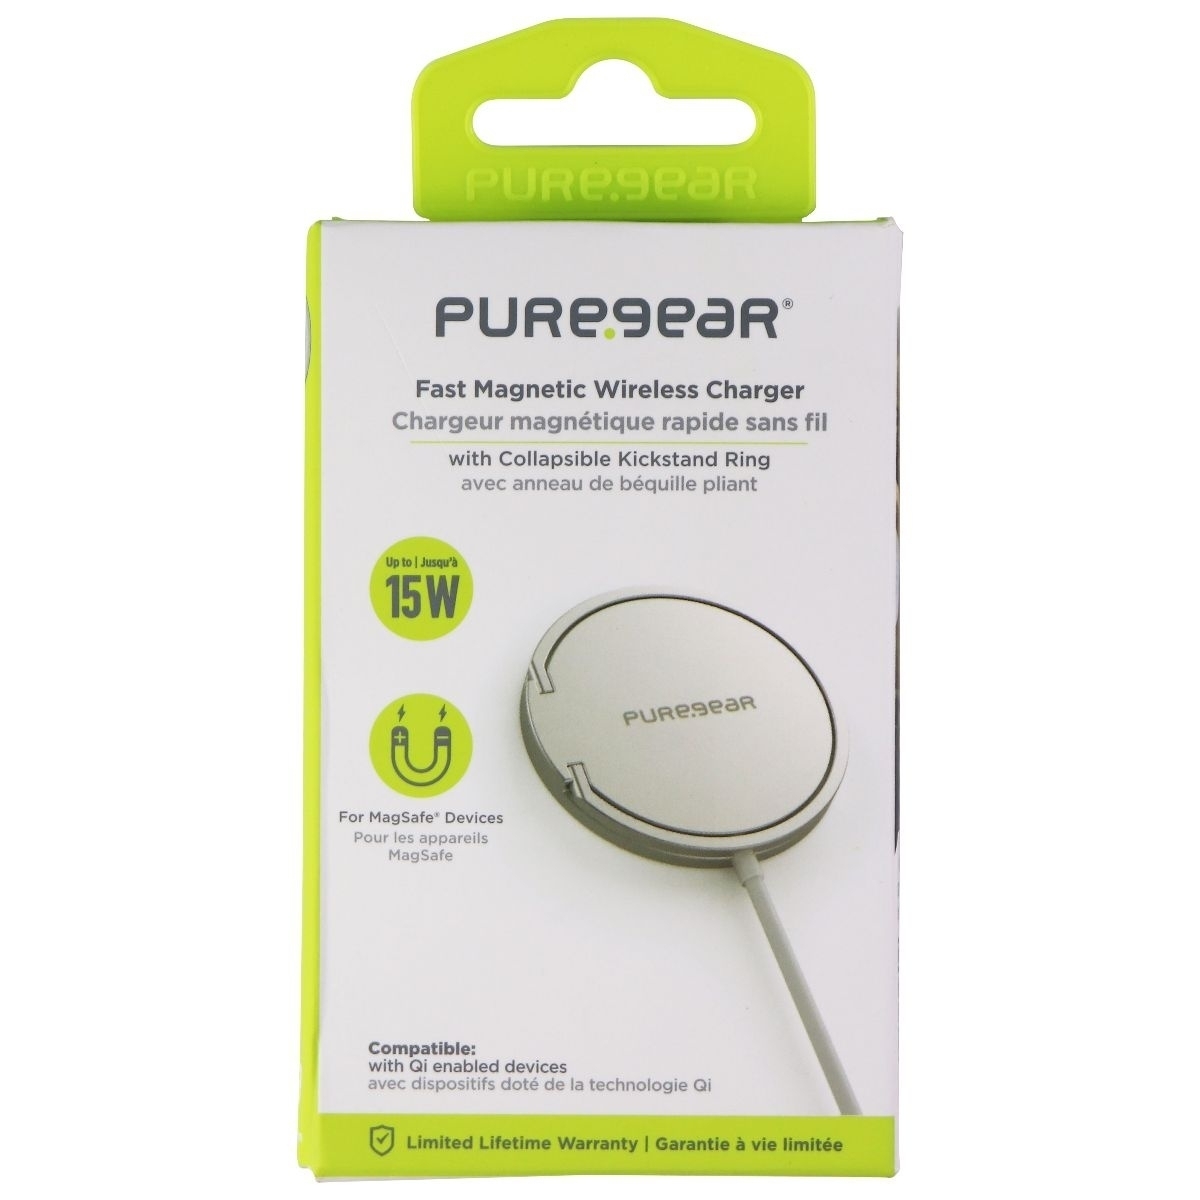 PureGear 15W Fast Magnetic (MagSafe) Wireless Charger - Silver/White (63871PG)